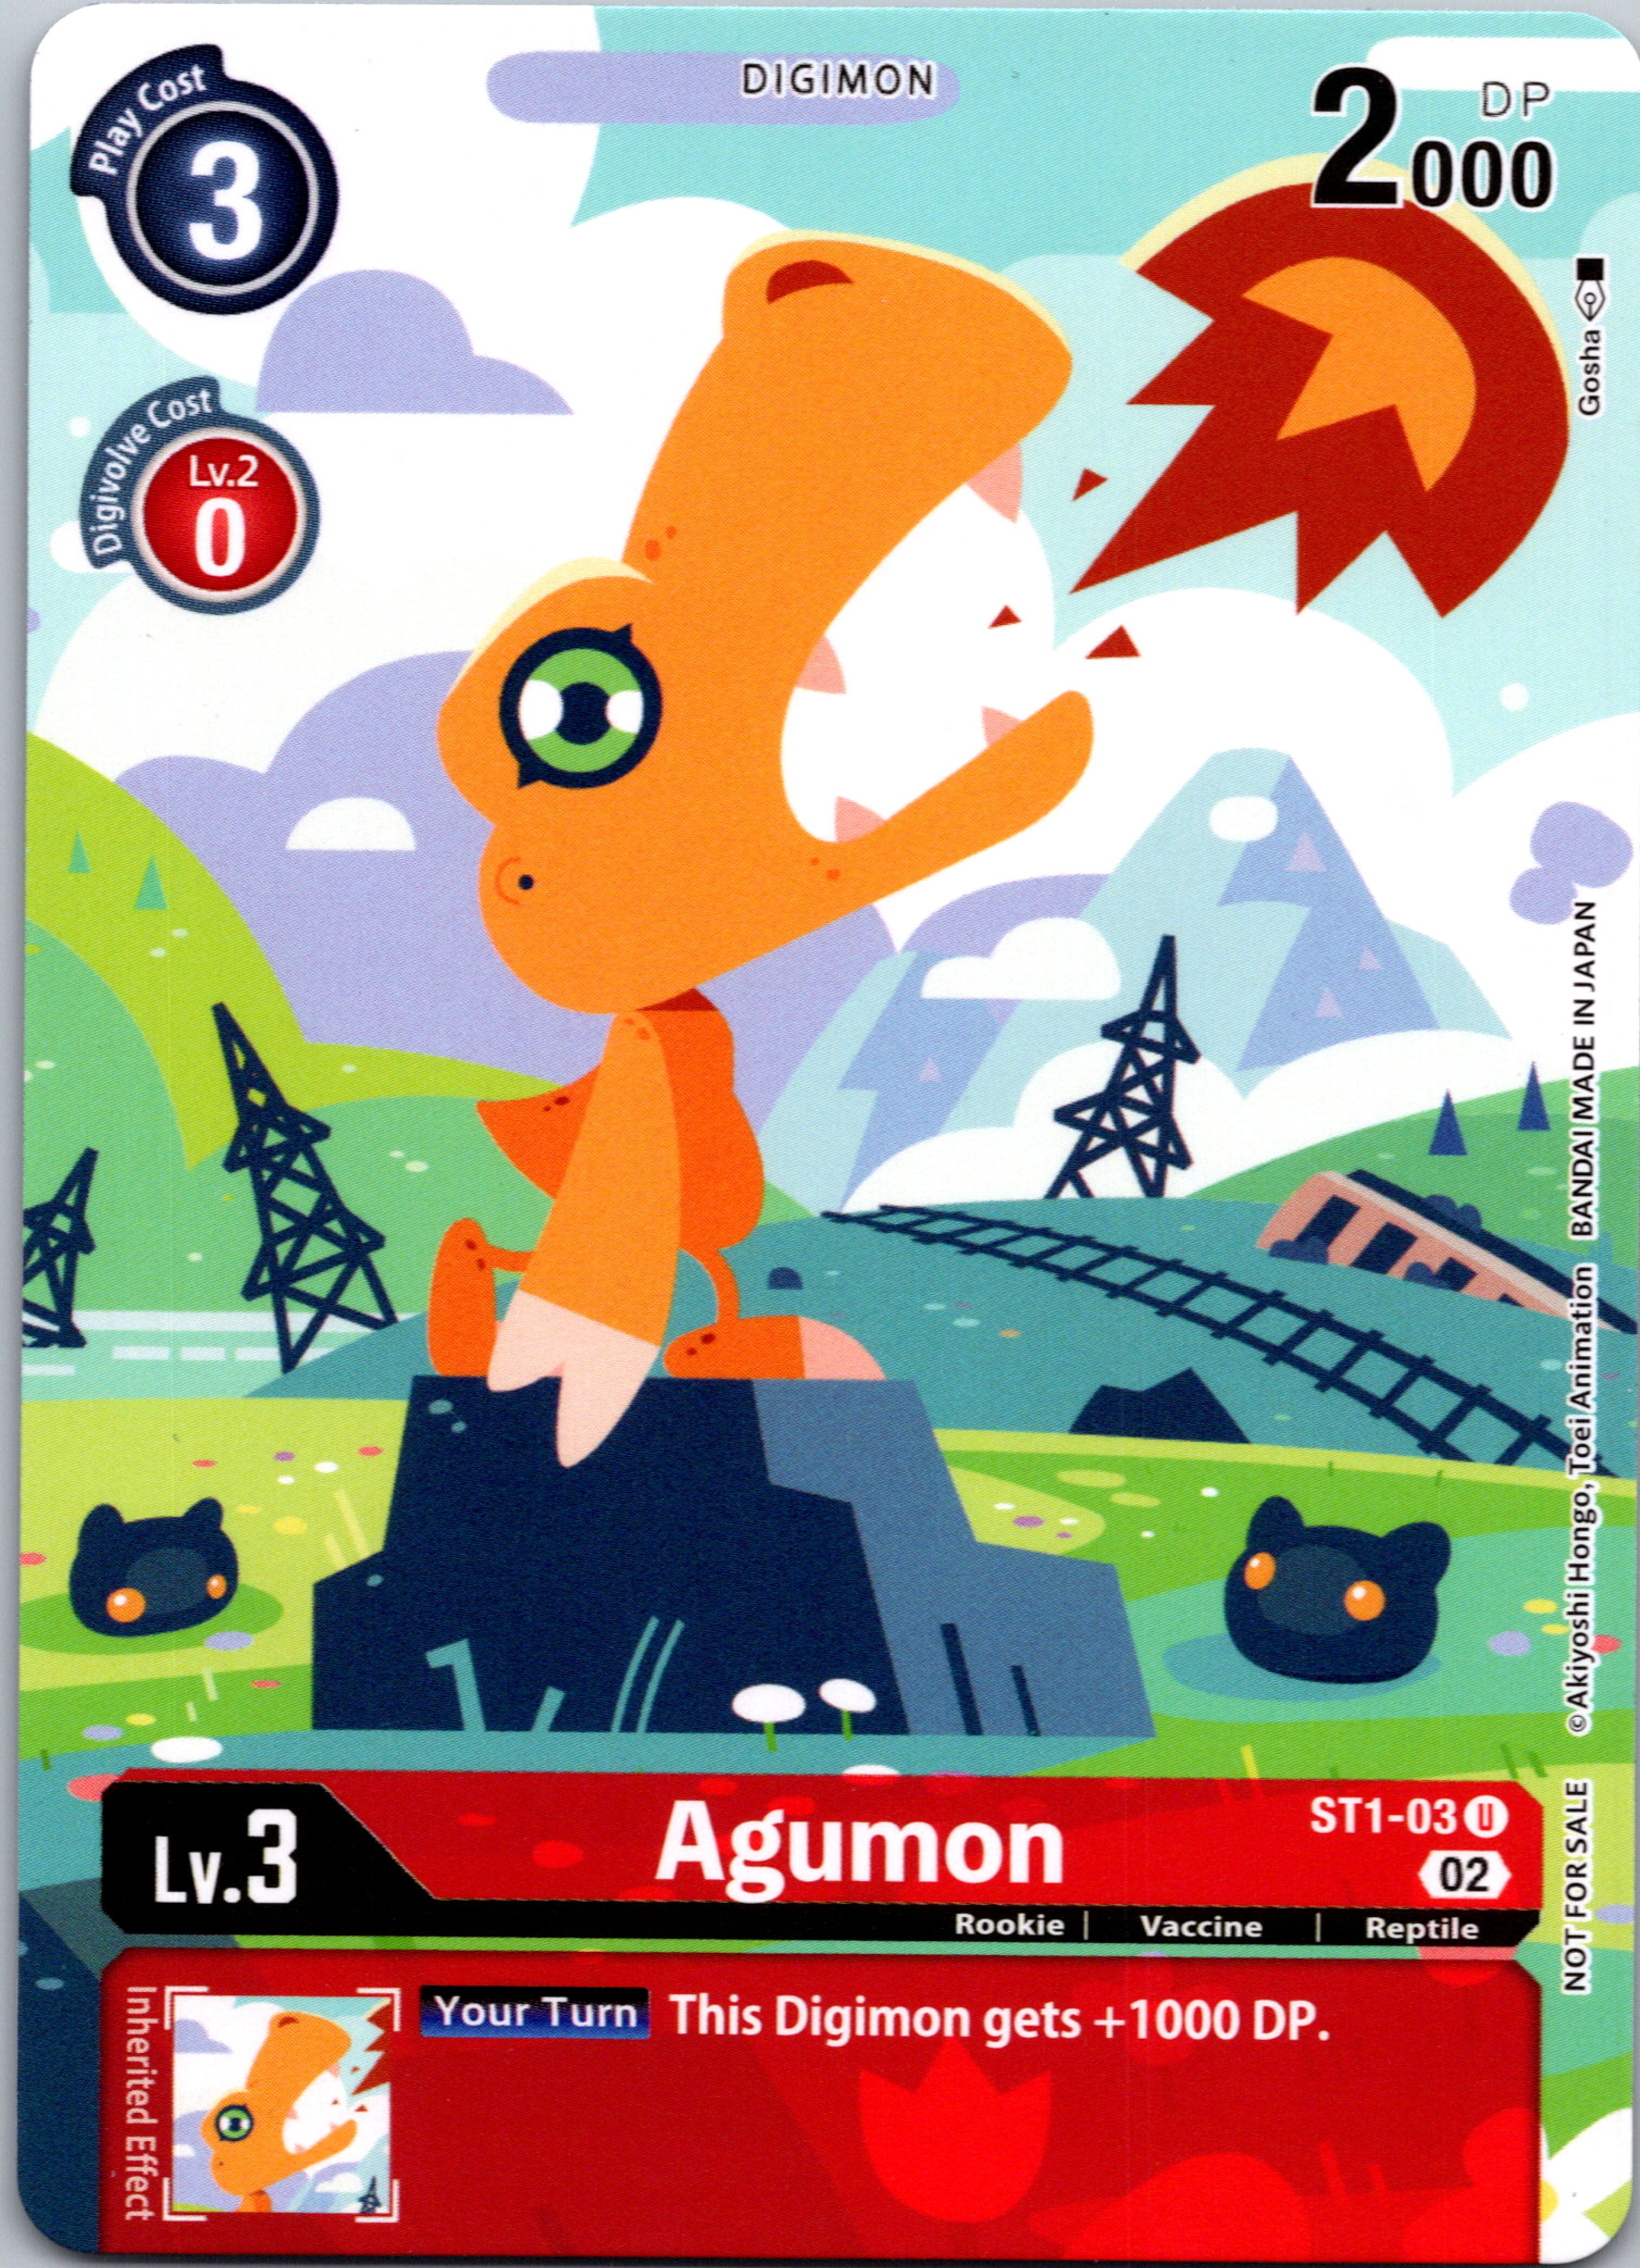 Agumon (Digimon Illustration Competition Pack 2022) [ST1-03] [Dimensional Phase] Normal